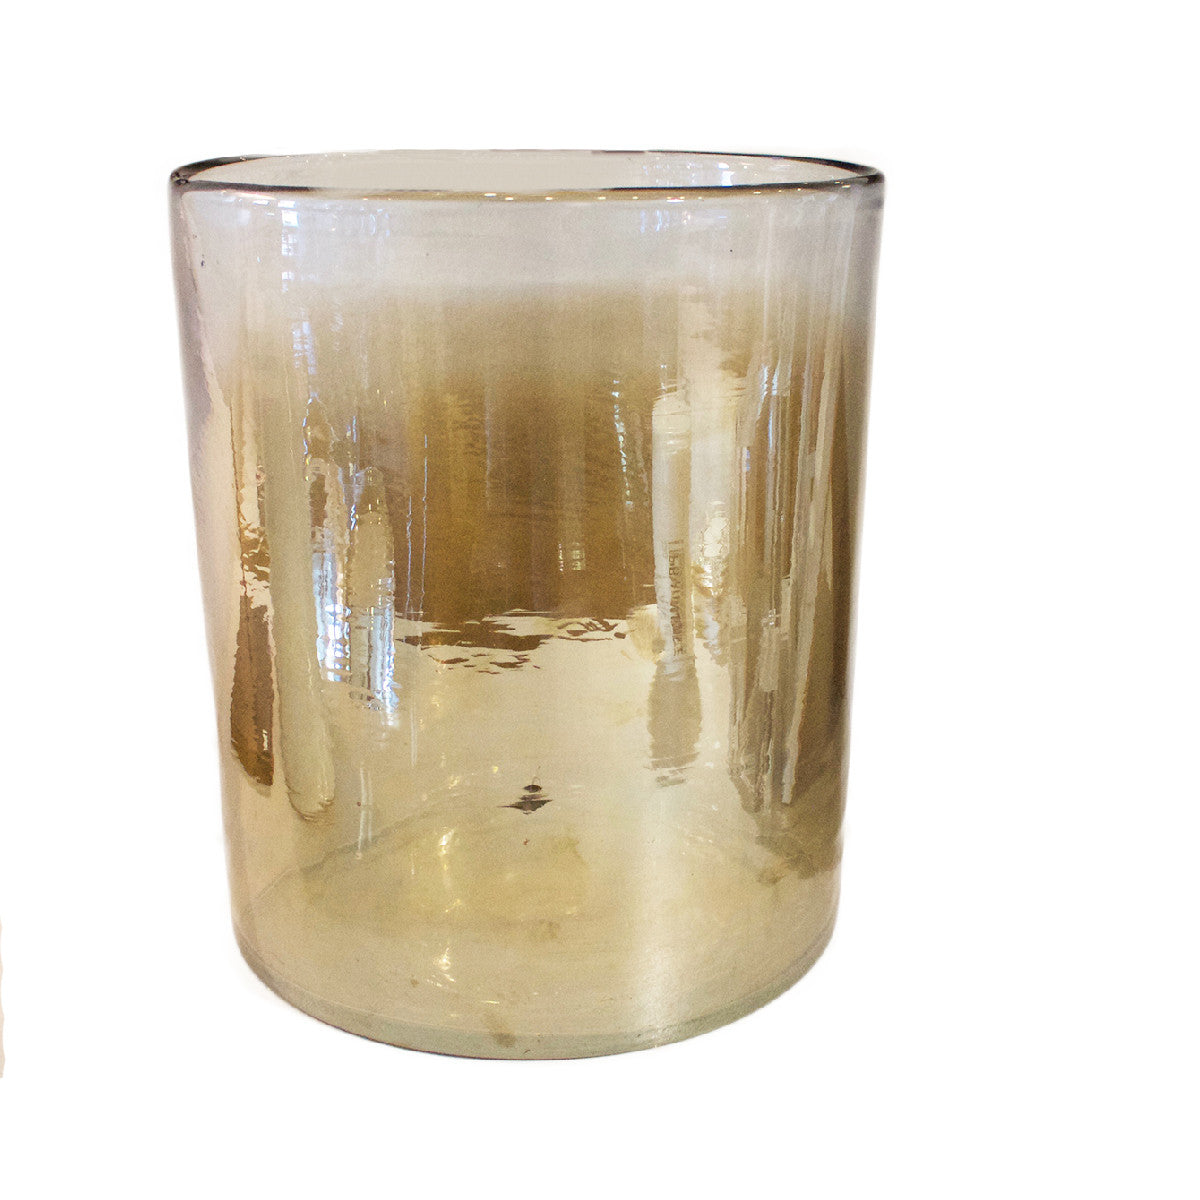 Metallic ombre glass hurricane will elevate any console, mantle or table. 